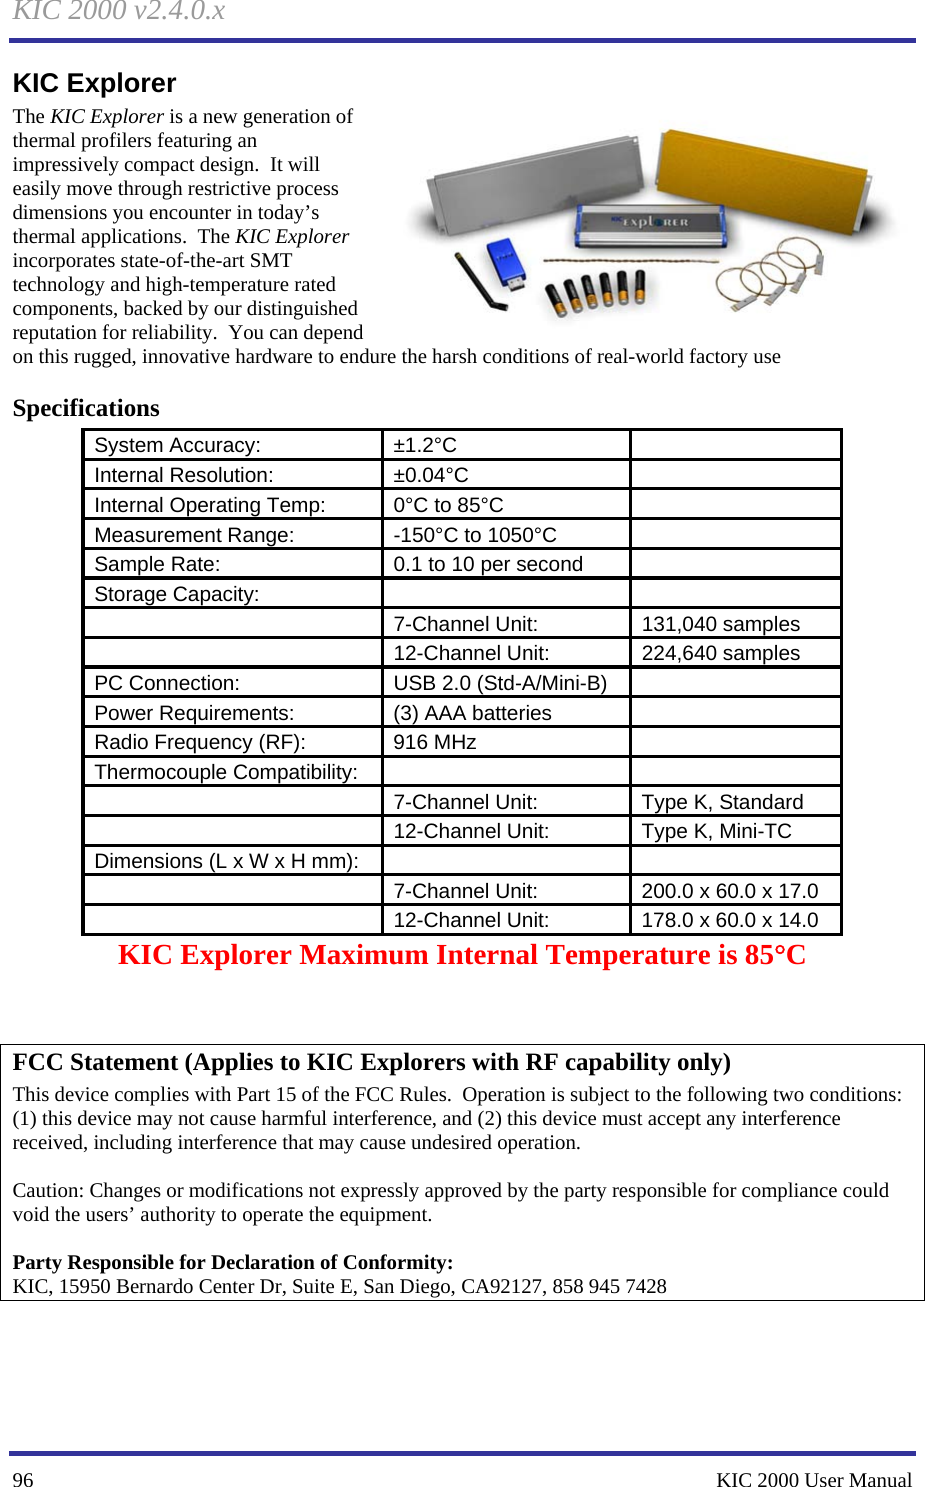 KIC 2000 v2.4.0.x 96    KIC 2000 User Manual KIC Explorer The KIC Explorer is a new generation of thermal profilers featuring an impressively compact design.  It will easily move through restrictive process dimensions you encounter in today’s thermal applications.  The KIC Explorer incorporates state-of-the-art SMT technology and high-temperature rated components, backed by our distinguished reputation for reliability.  You can depend on this rugged, innovative hardware to endure the harsh conditions of real-world factory use Specifications System Accuracy:  ±1.2°C     Internal Resolution:  ±0.04°C     Internal Operating Temp:  0°C to 85°C    Measurement Range:  -150°C to 1050°C    Sample Rate:  0.1 to 10 per second    Storage Capacity:          7-Channel Unit:  131,040 samples    12-Channel Unit:  224,640 samples PC Connection:  USB 2.0 (Std-A/Mini-B)    Power Requirements:  (3) AAA batteries    Radio Frequency (RF):  916 MHz    Thermocouple Compatibility:          7-Channel Unit:  Type K, Standard    12-Channel Unit:  Type K, Mini-TC Dimensions (L x W x H mm):          7-Channel Unit:  200.0 x 60.0 x 17.0    12-Channel Unit:  178.0 x 60.0 x 14.0 KIC Explorer Maximum Internal Temperature is 85°C   FCC Statement (Applies to KIC Explorers with RF capability only) This device complies with Part 15 of the FCC Rules.  Operation is subject to the following two conditions: (1) this device may not cause harmful interference, and (2) this device must accept any interference received, including interference that may cause undesired operation.    Caution: Changes or modifications not expressly approved by the party responsible for compliance could void the users’ authority to operate the equipment.    Party Responsible for Declaration of Conformity: KIC, 15950 Bernardo Center Dr, Suite E, San Diego, CA92127, 858 945 7428  